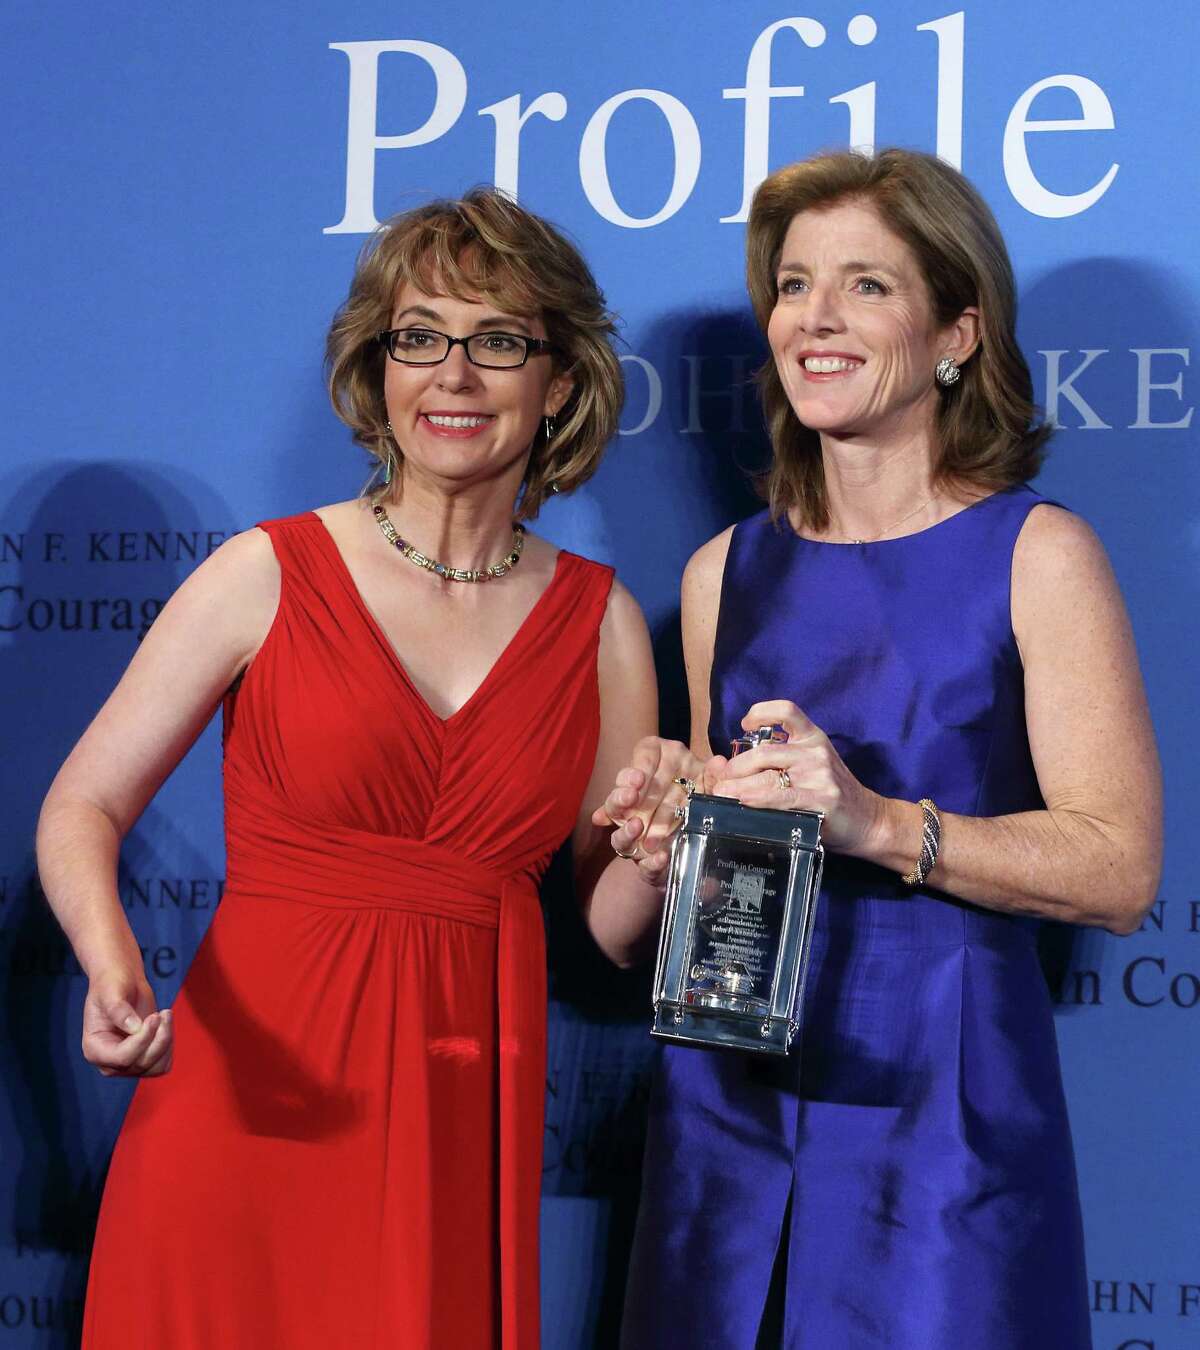 Caroline Kennedy (right) displays the 2013 Profile in Courage award she had just presented to former U.S. Rep. Gabrielle Giffords (left) at the John F. Kennedy Library in Boston.